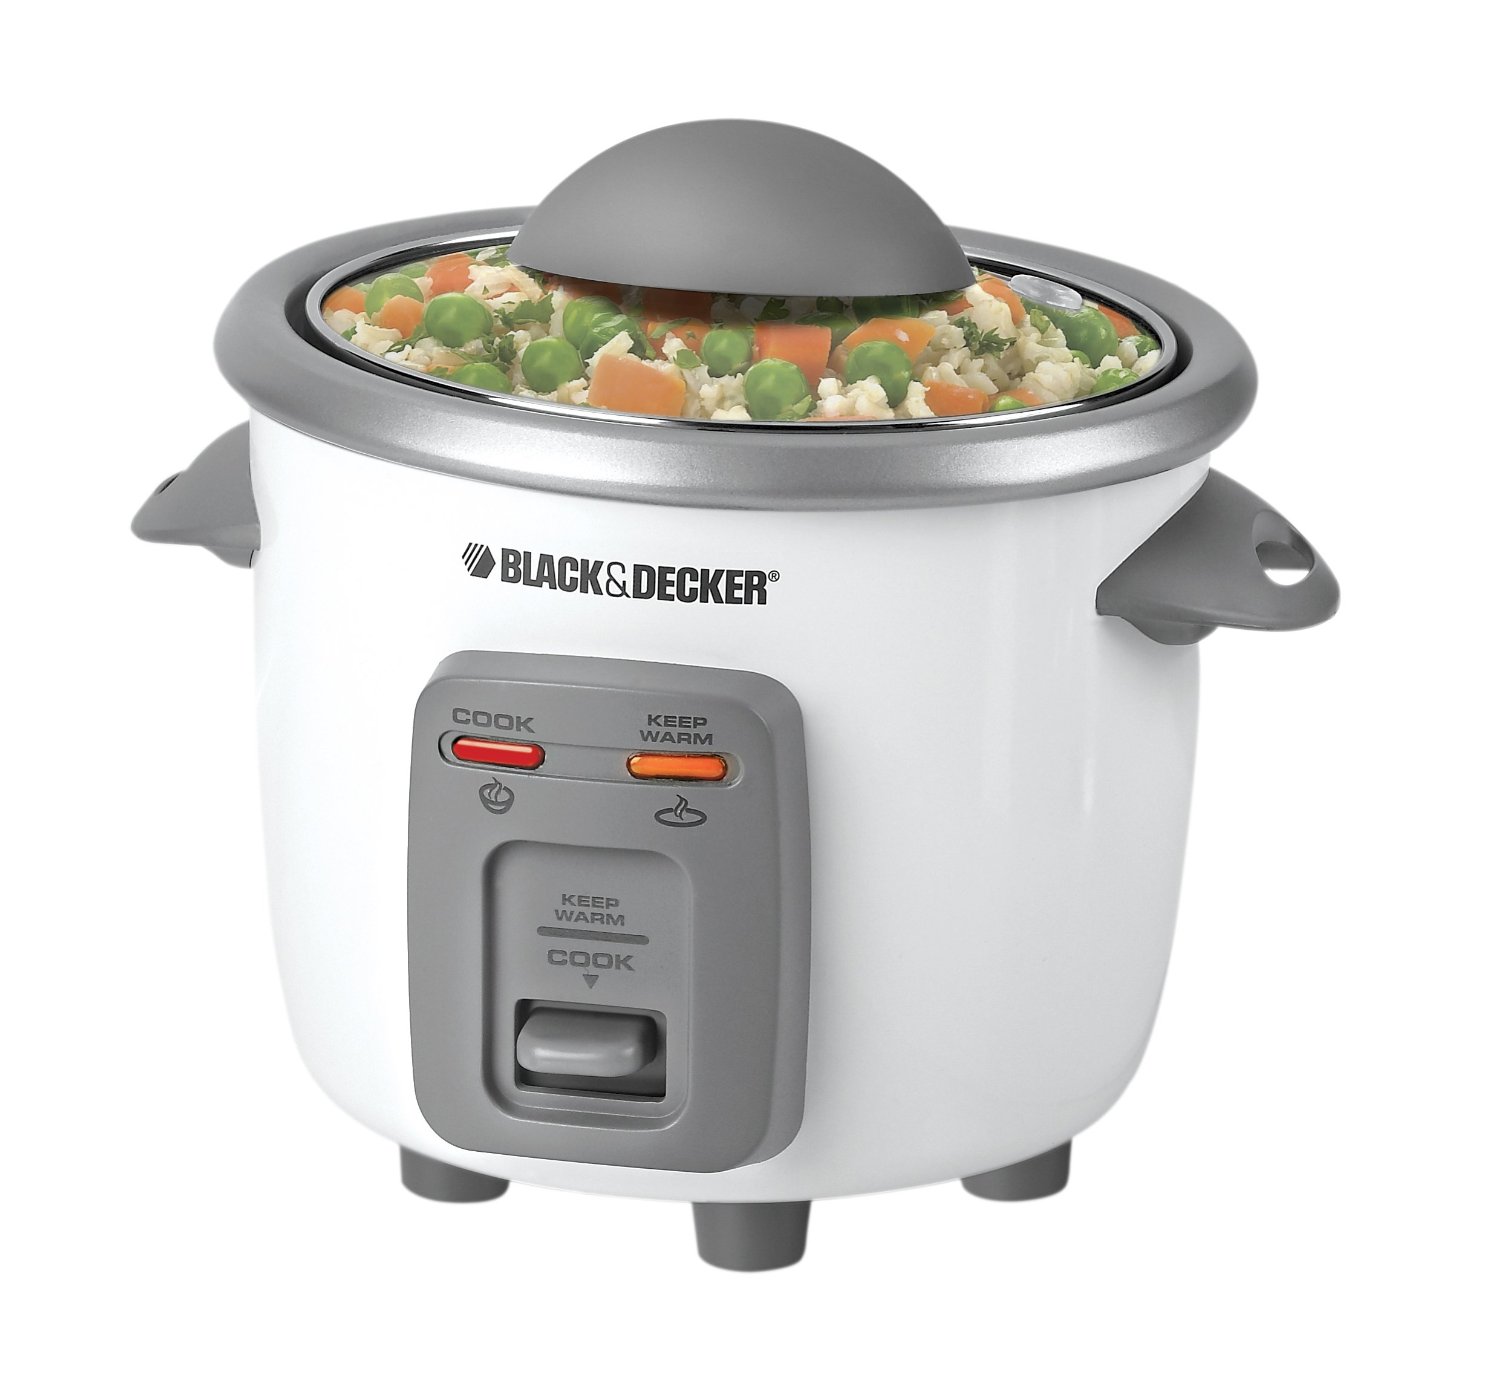 https://storables.com/wp-content/uploads/2023/08/8-best-black-decker-rc516-16-cup-rice-cooker-and-warmer-for-2023-1693095485.jpg